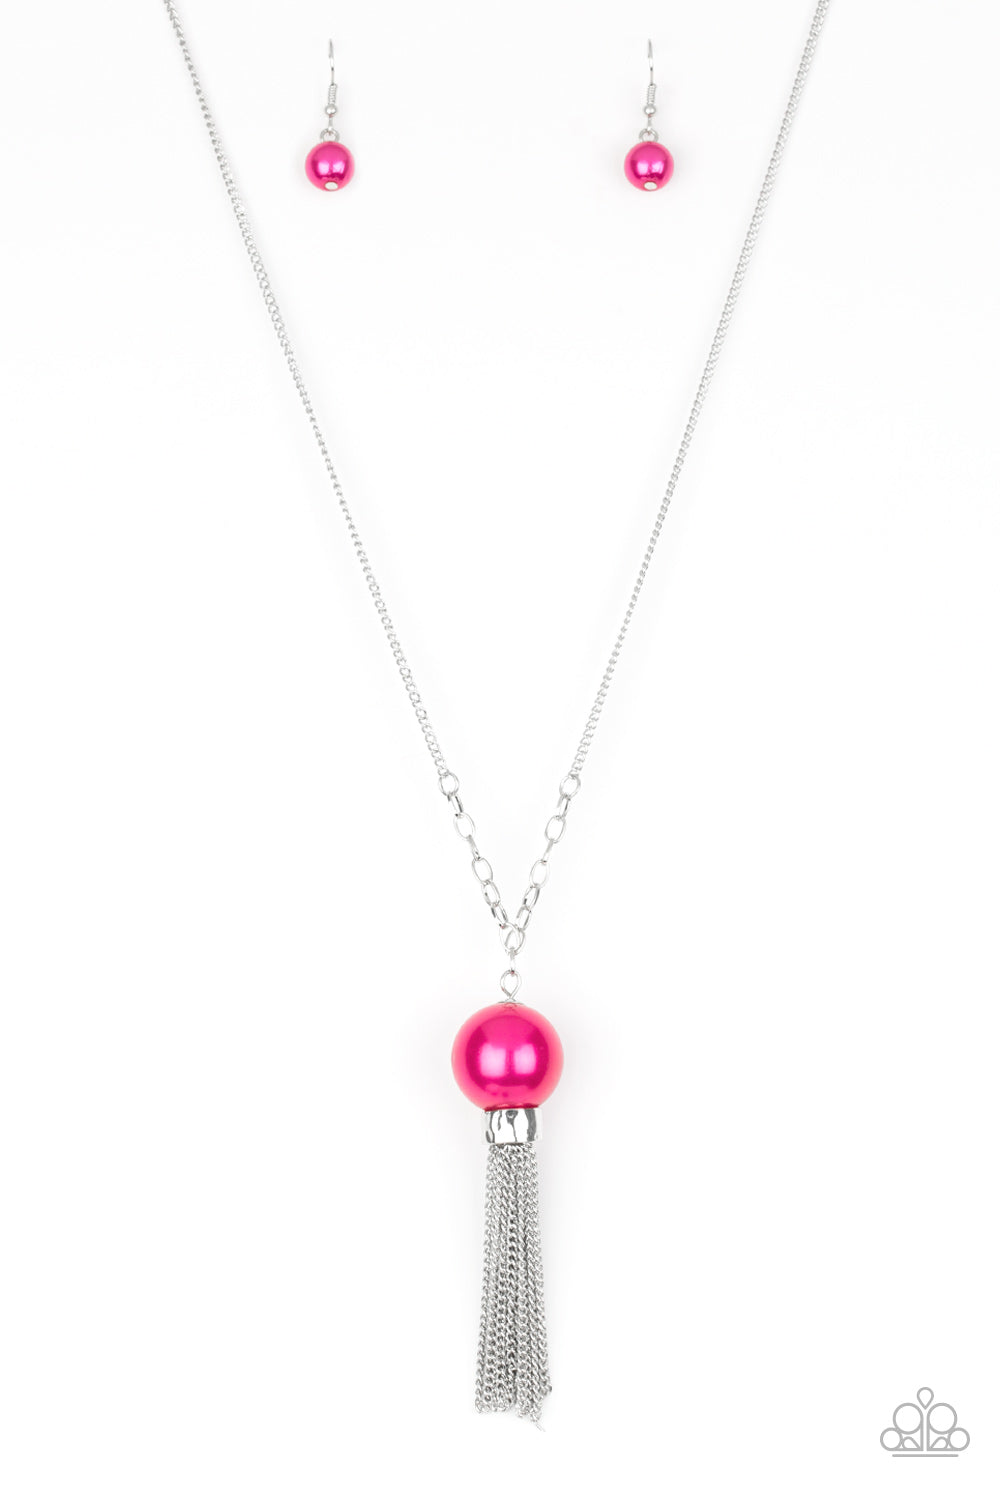 Belle of the BALLROOM Pink Necklace - Paparazzi Accessories